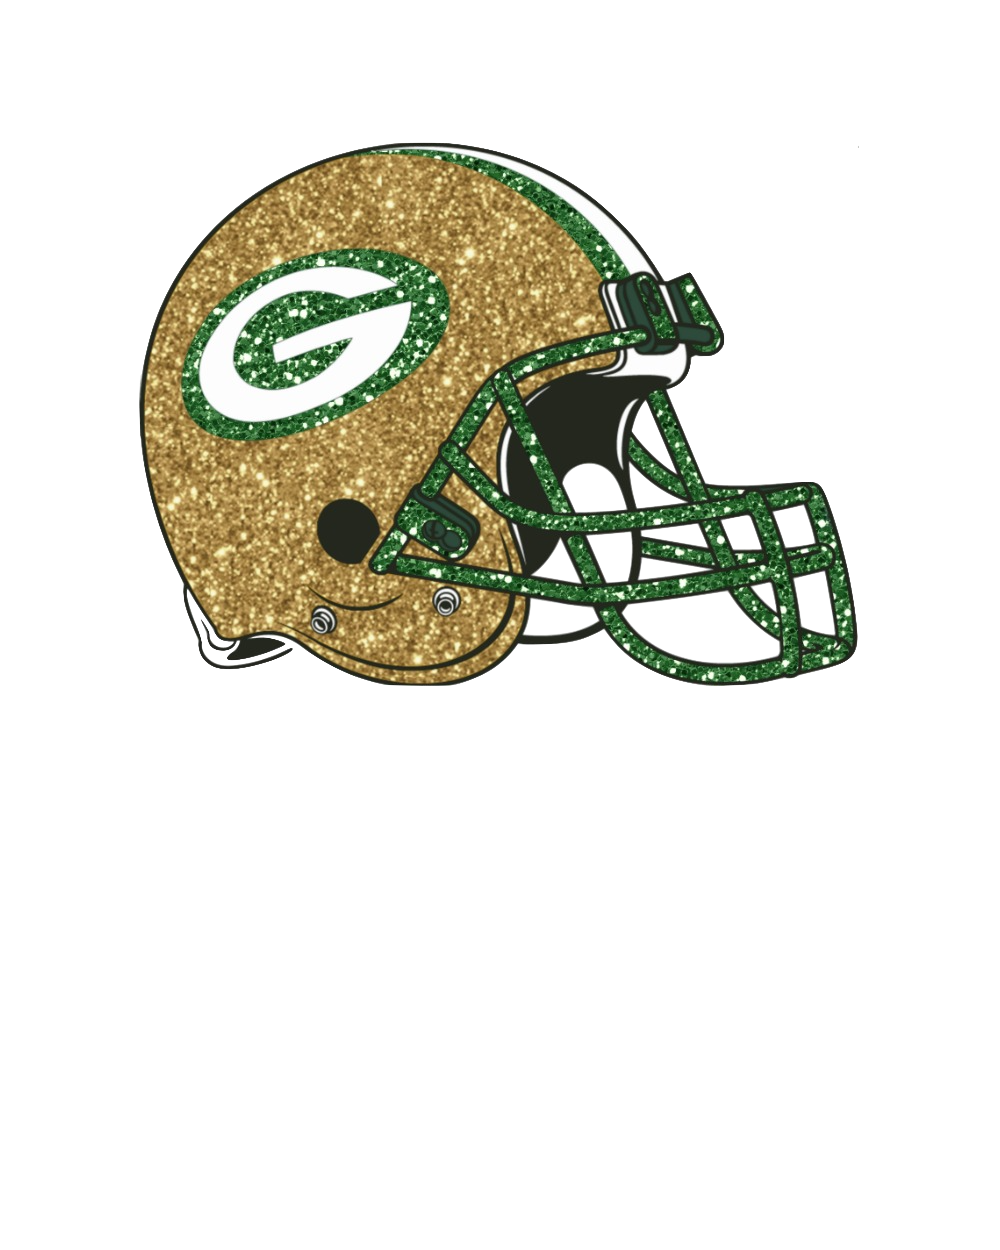 Green Bay Packers Bundle!   Green Bay Packers Rock -  Sports Football Team Clip Art SCROLL TO THE ITEM YOU WANT TO DOWNLOAD